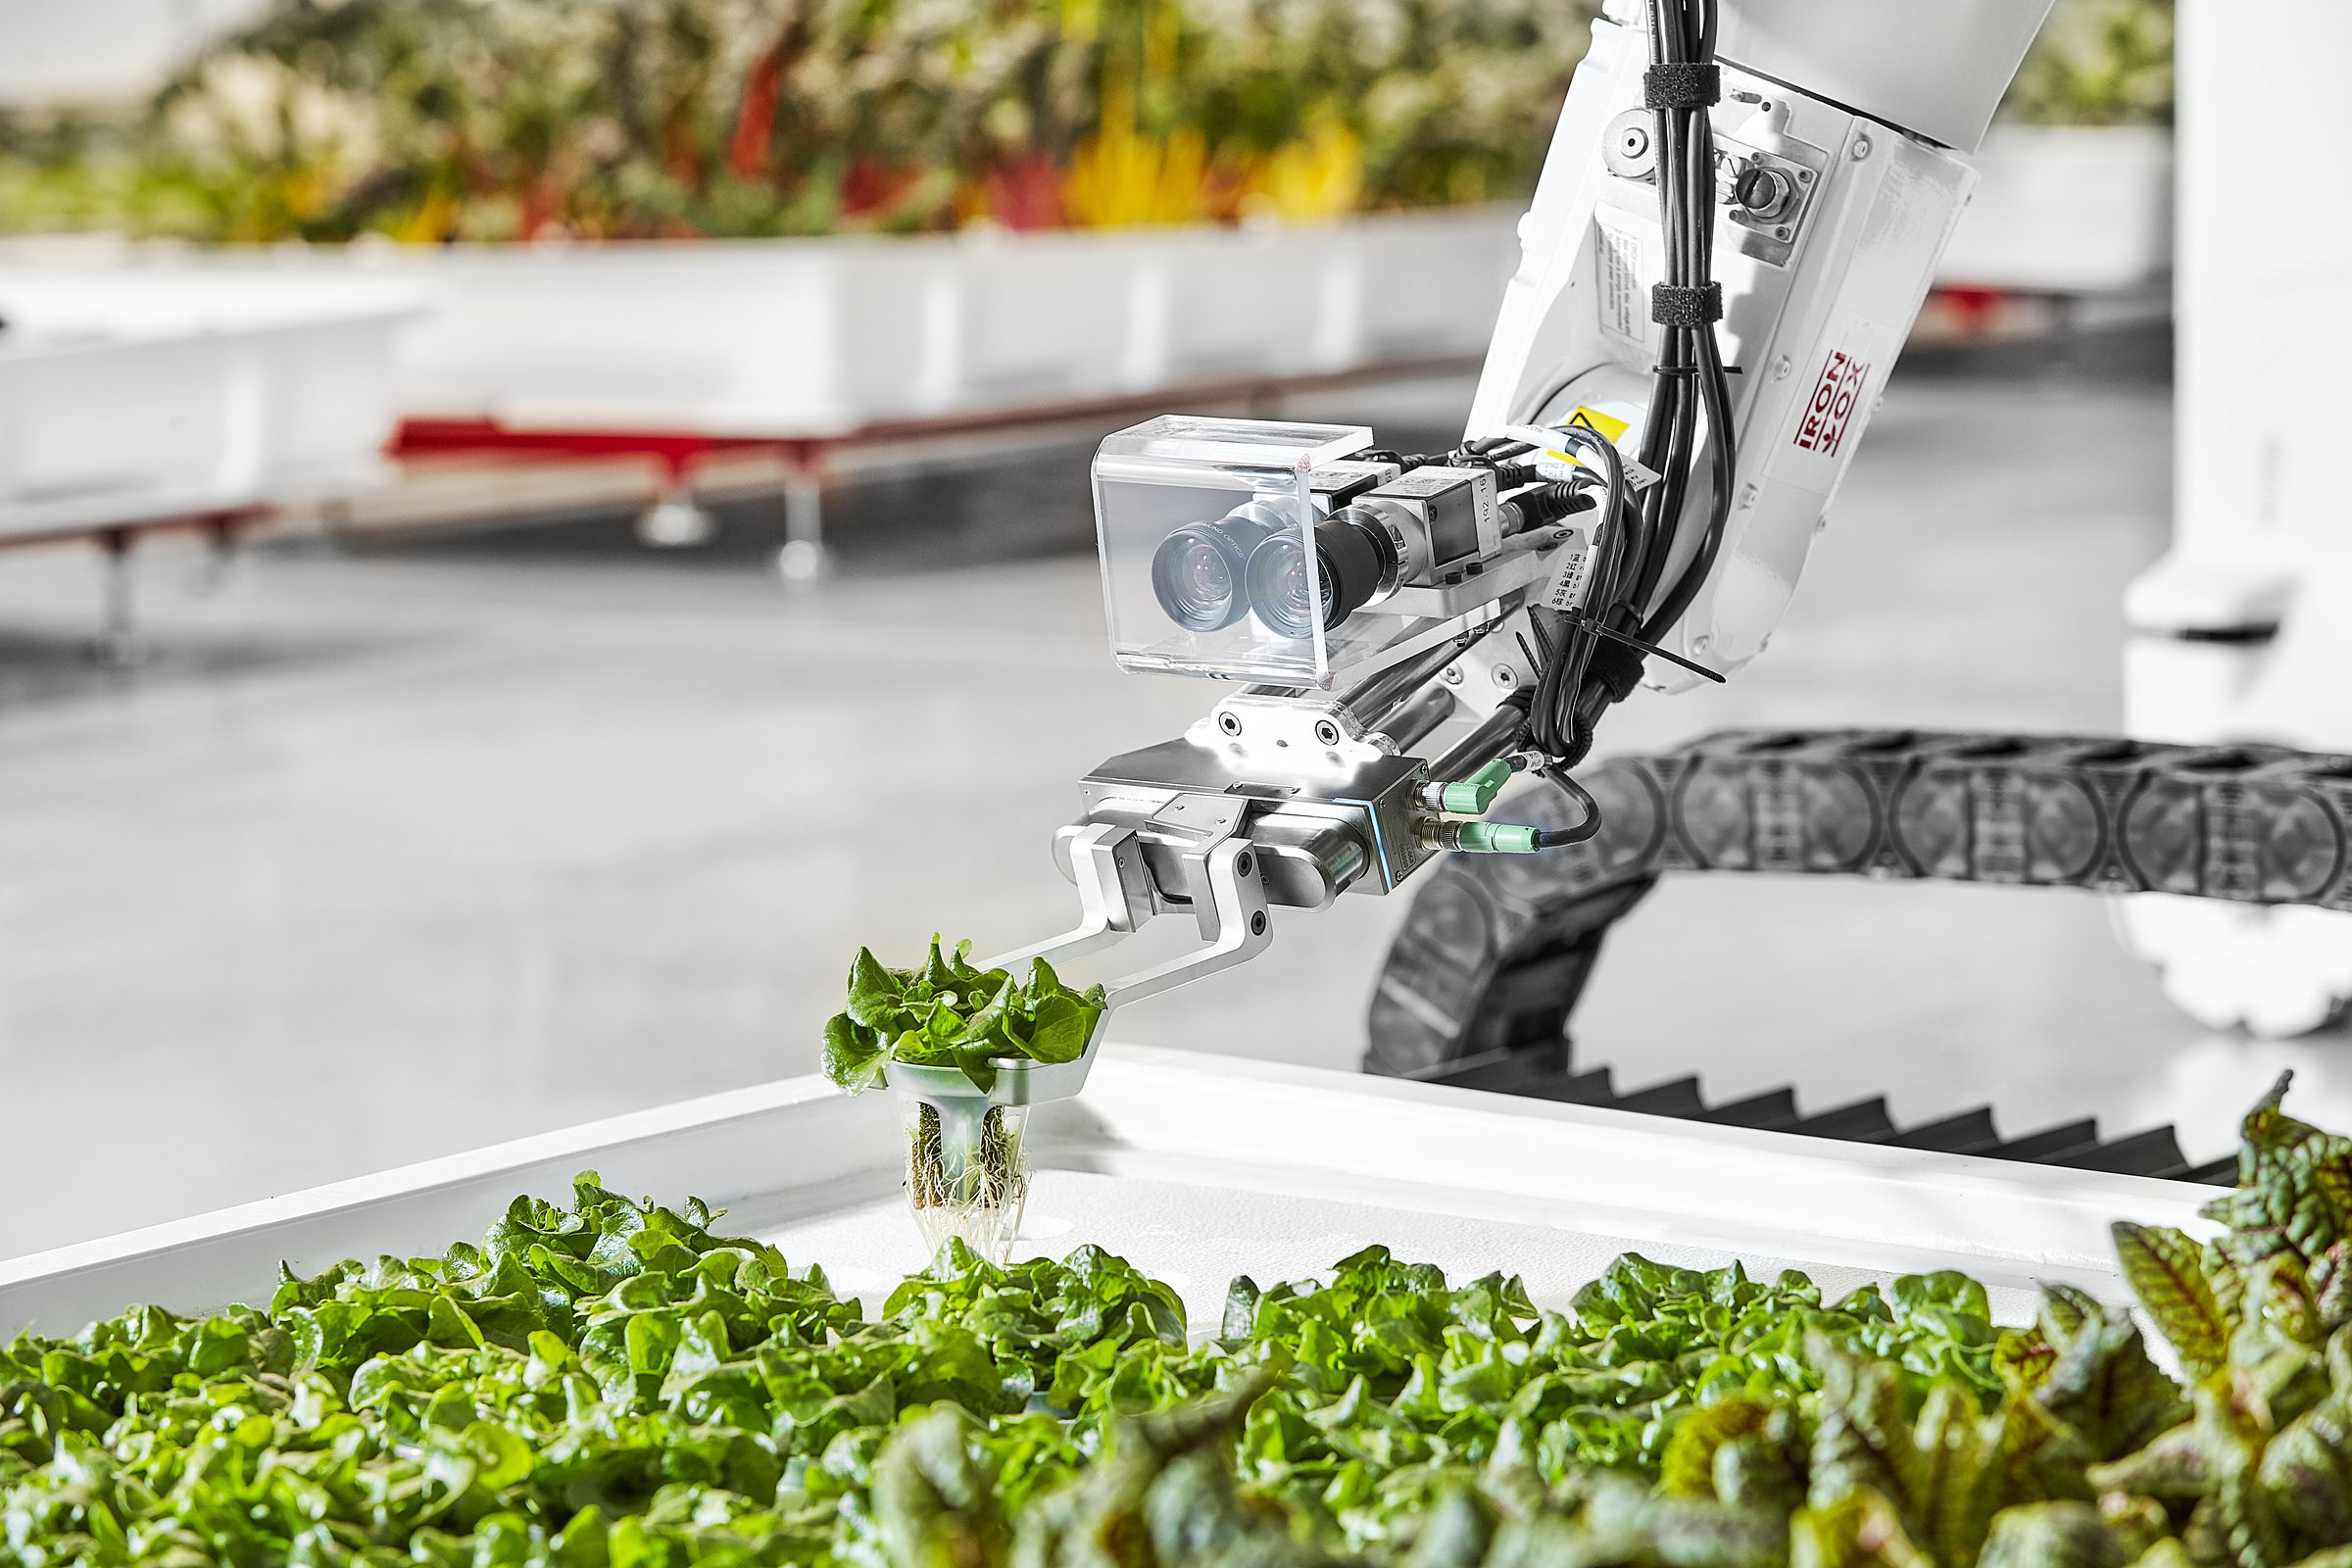 Iron Ox uses robots to assist in the process of growing produce.